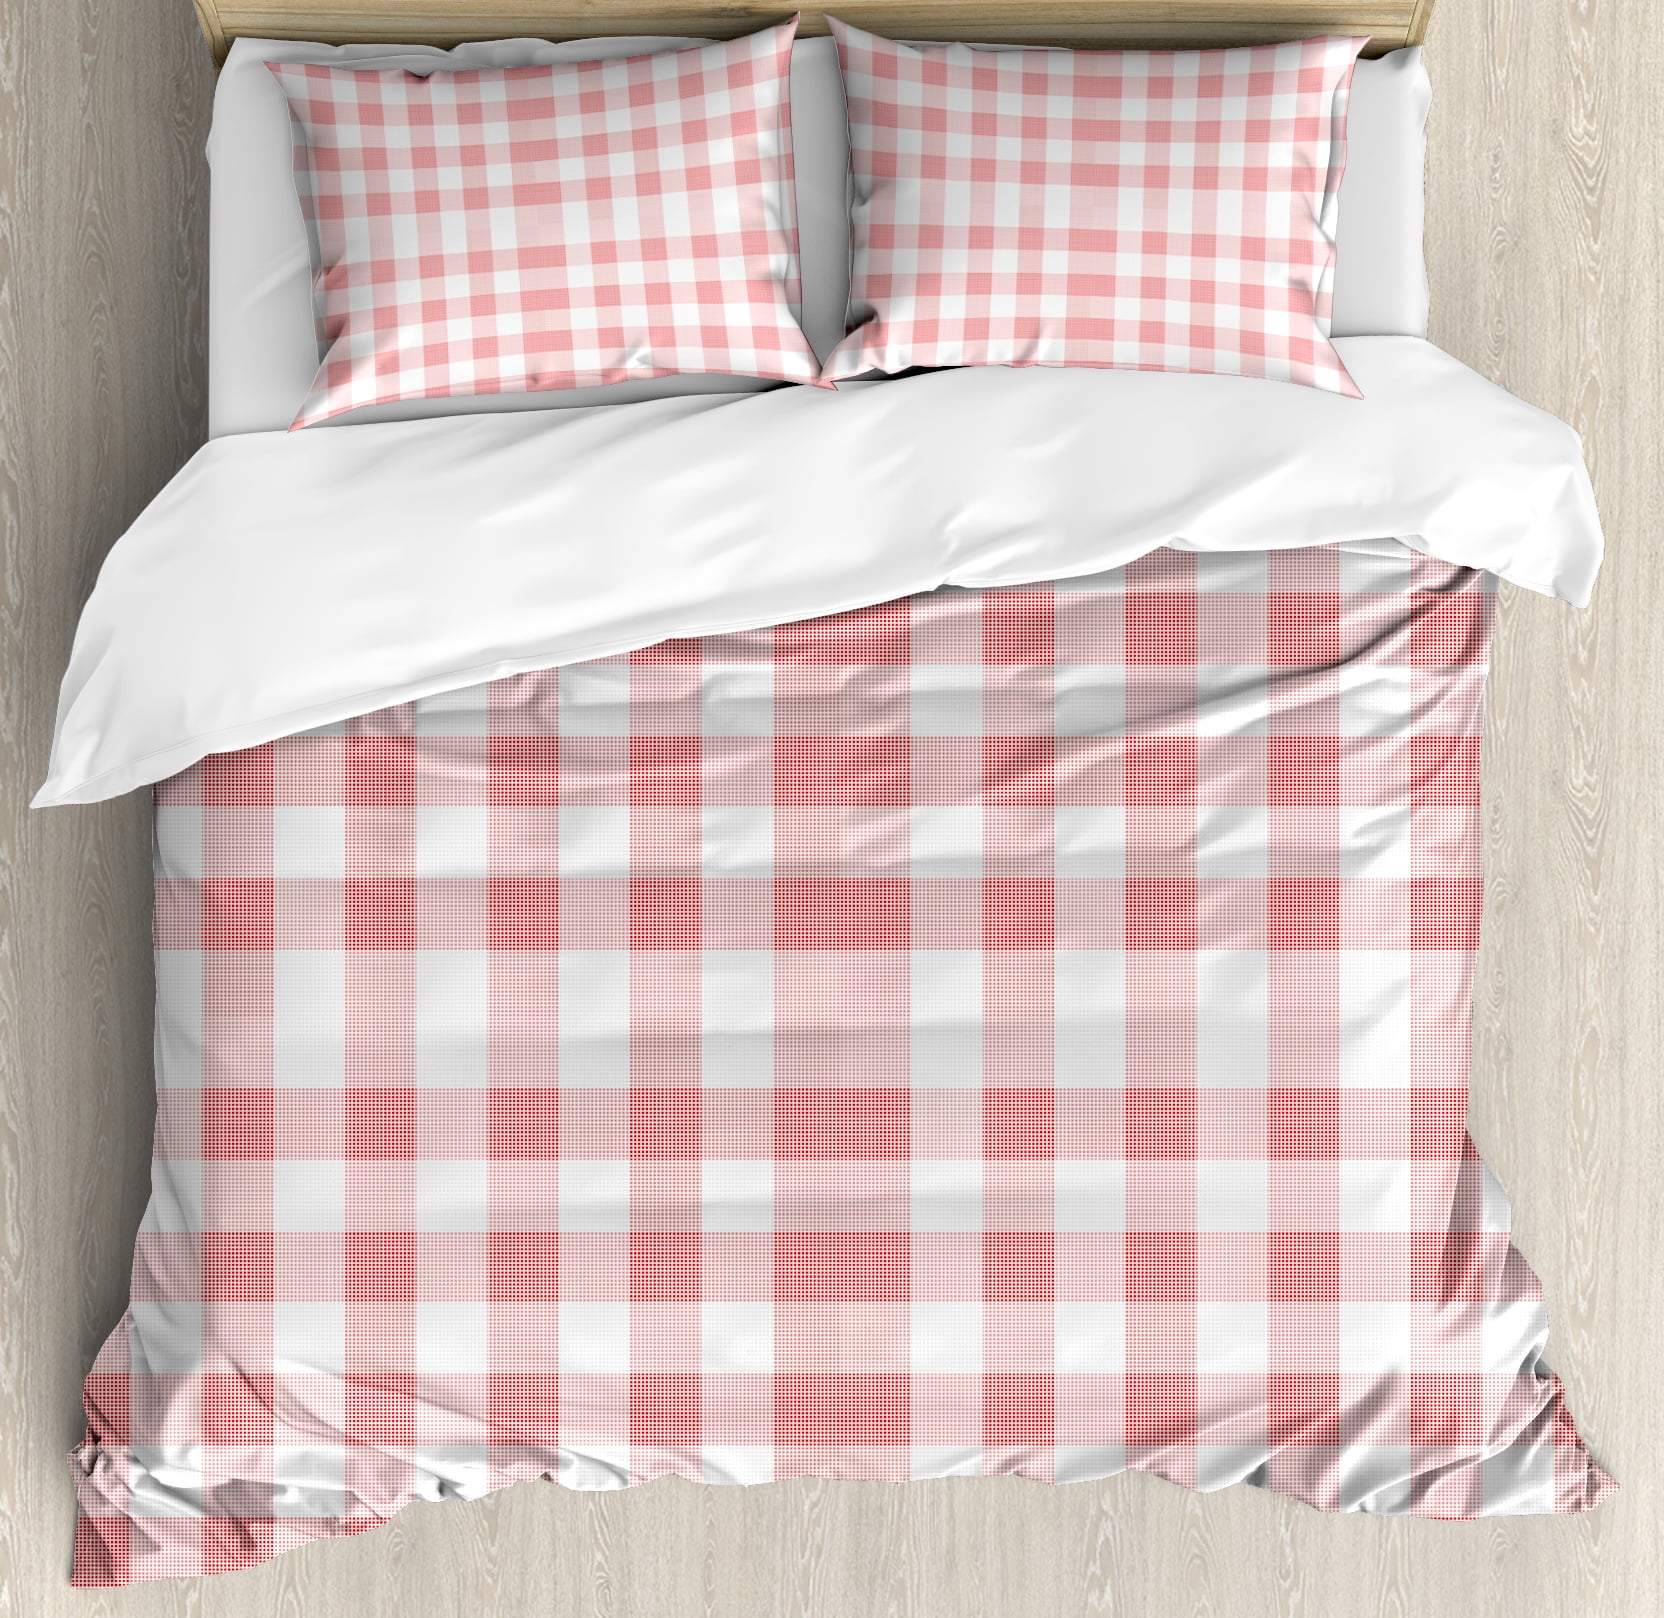 Checkered Duvet Cover Set Picnic In Countryside Themed Gingham